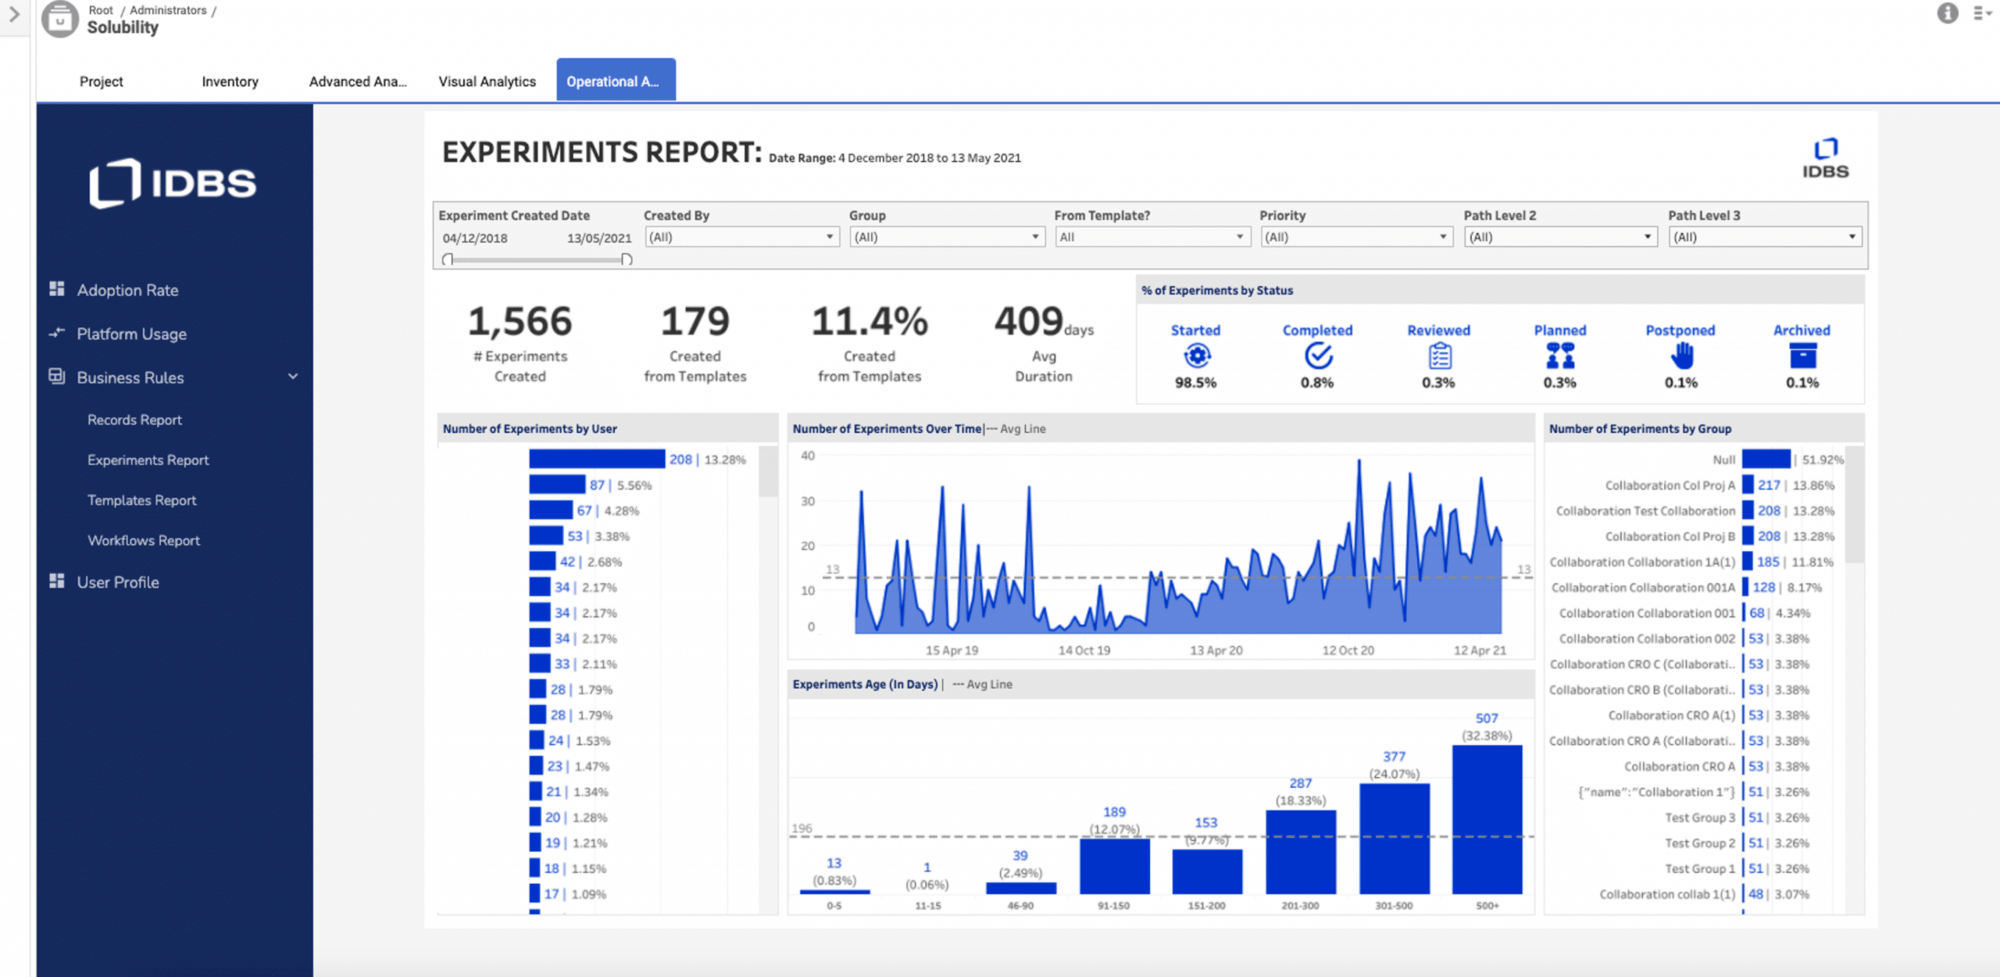 Image of IDBS dashboard that shows number of experiments and status of experiments